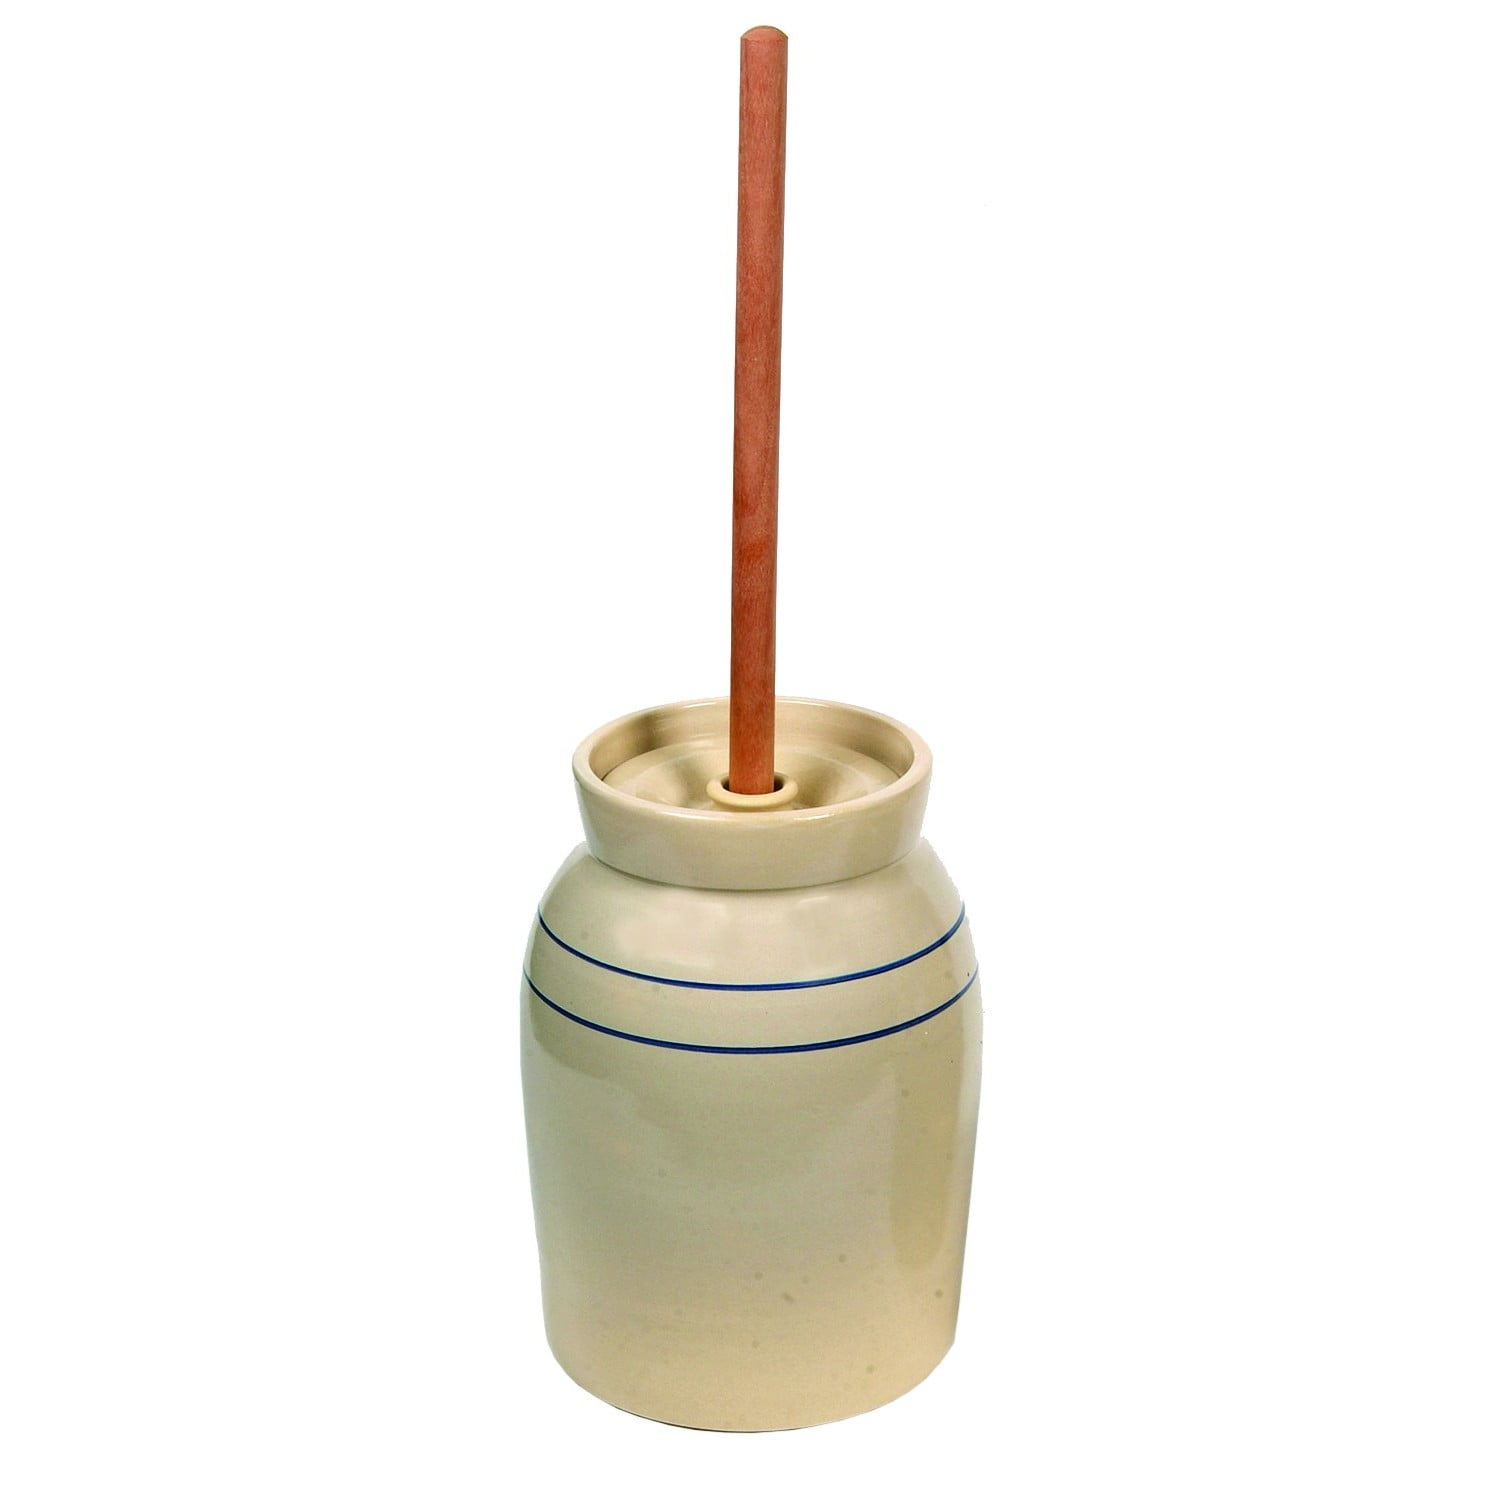 Butter churns - history of domestic butter-making